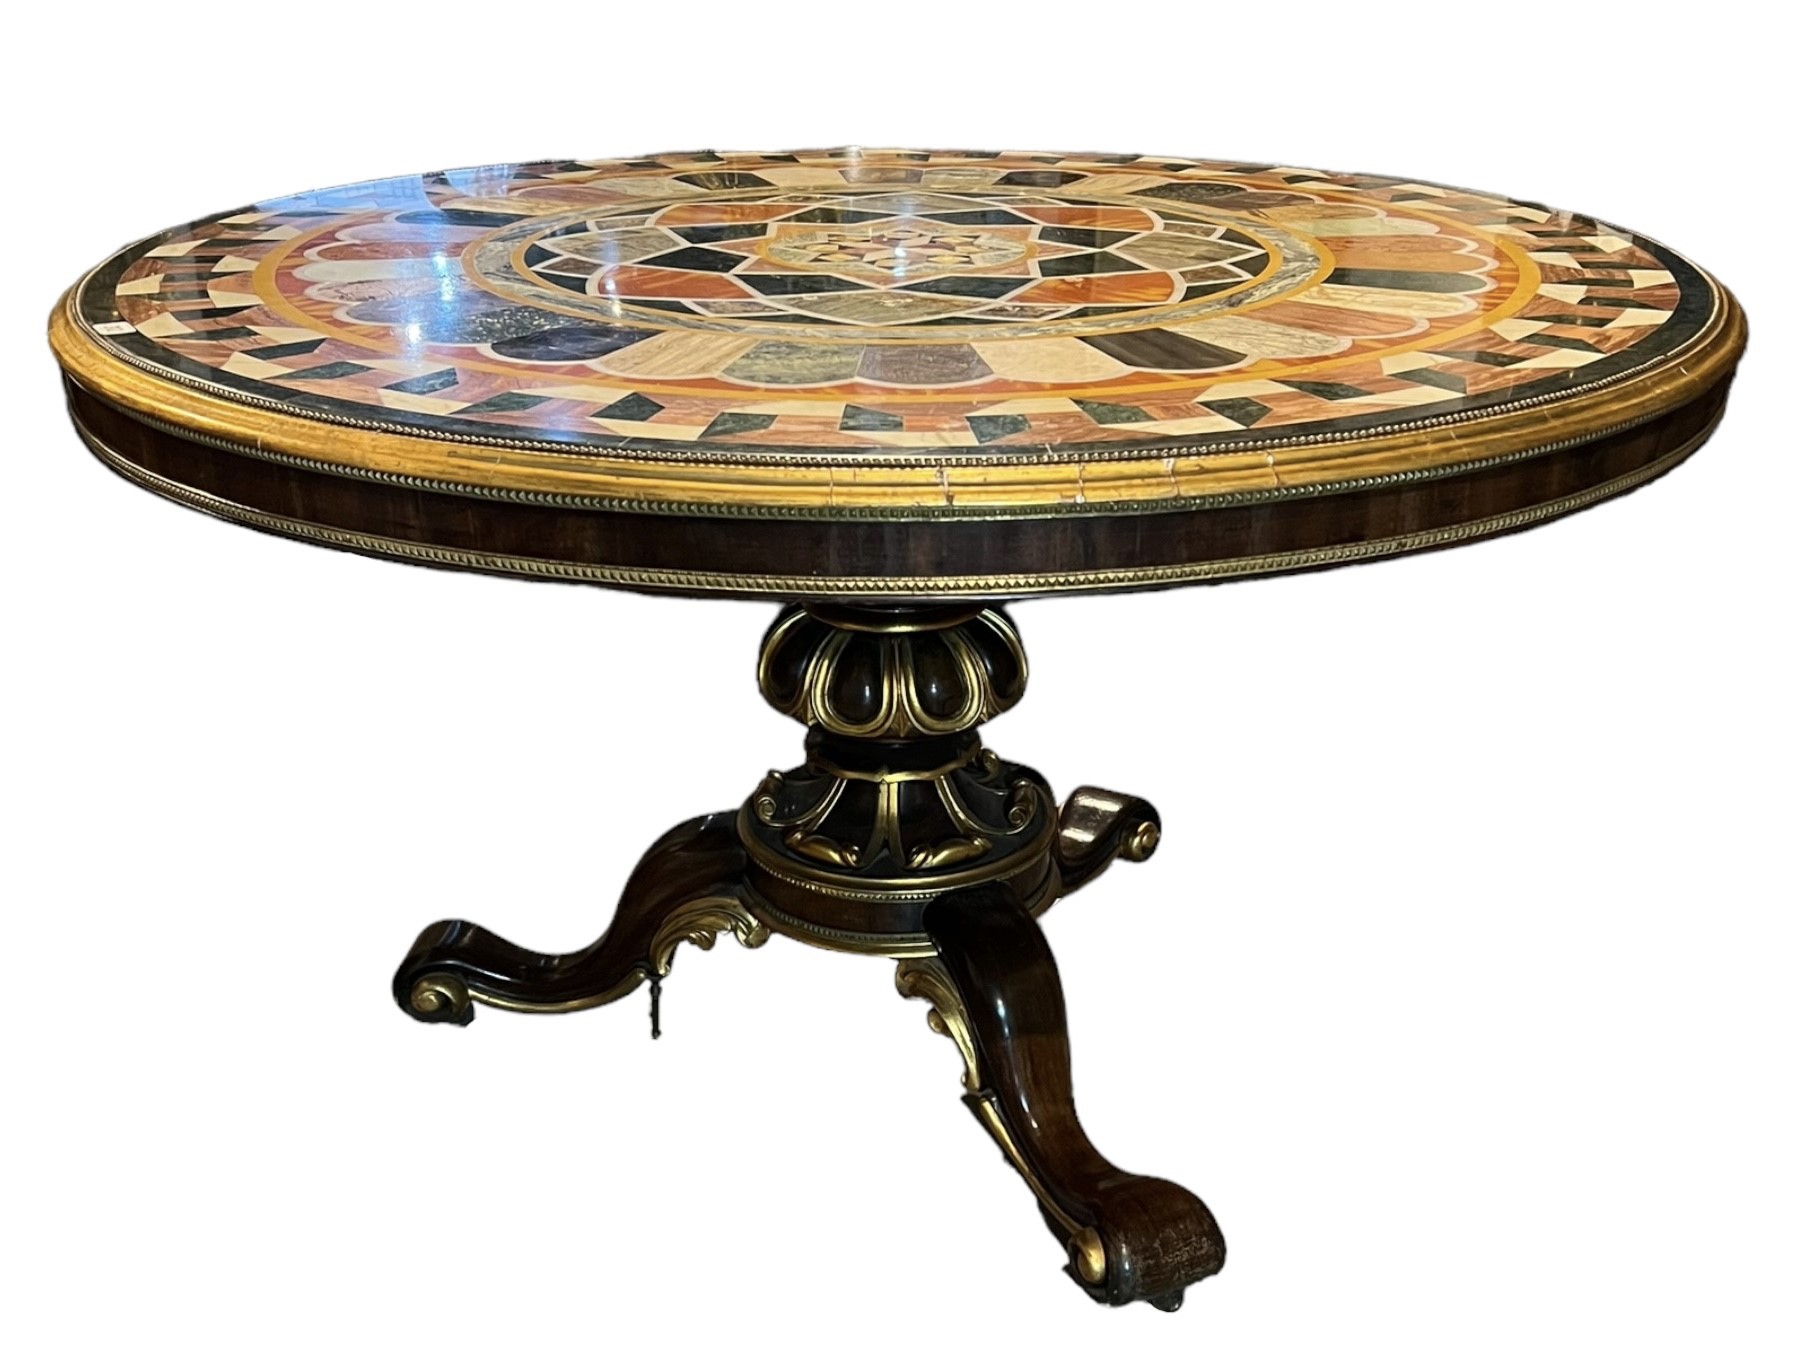 A FINE 19TH CENTURY VICTORIAN ROSEWOOD AND PARCEL GILT METAL MOUNTED SPECIMEN CIRCULAR TOP CENTRE - Image 6 of 7